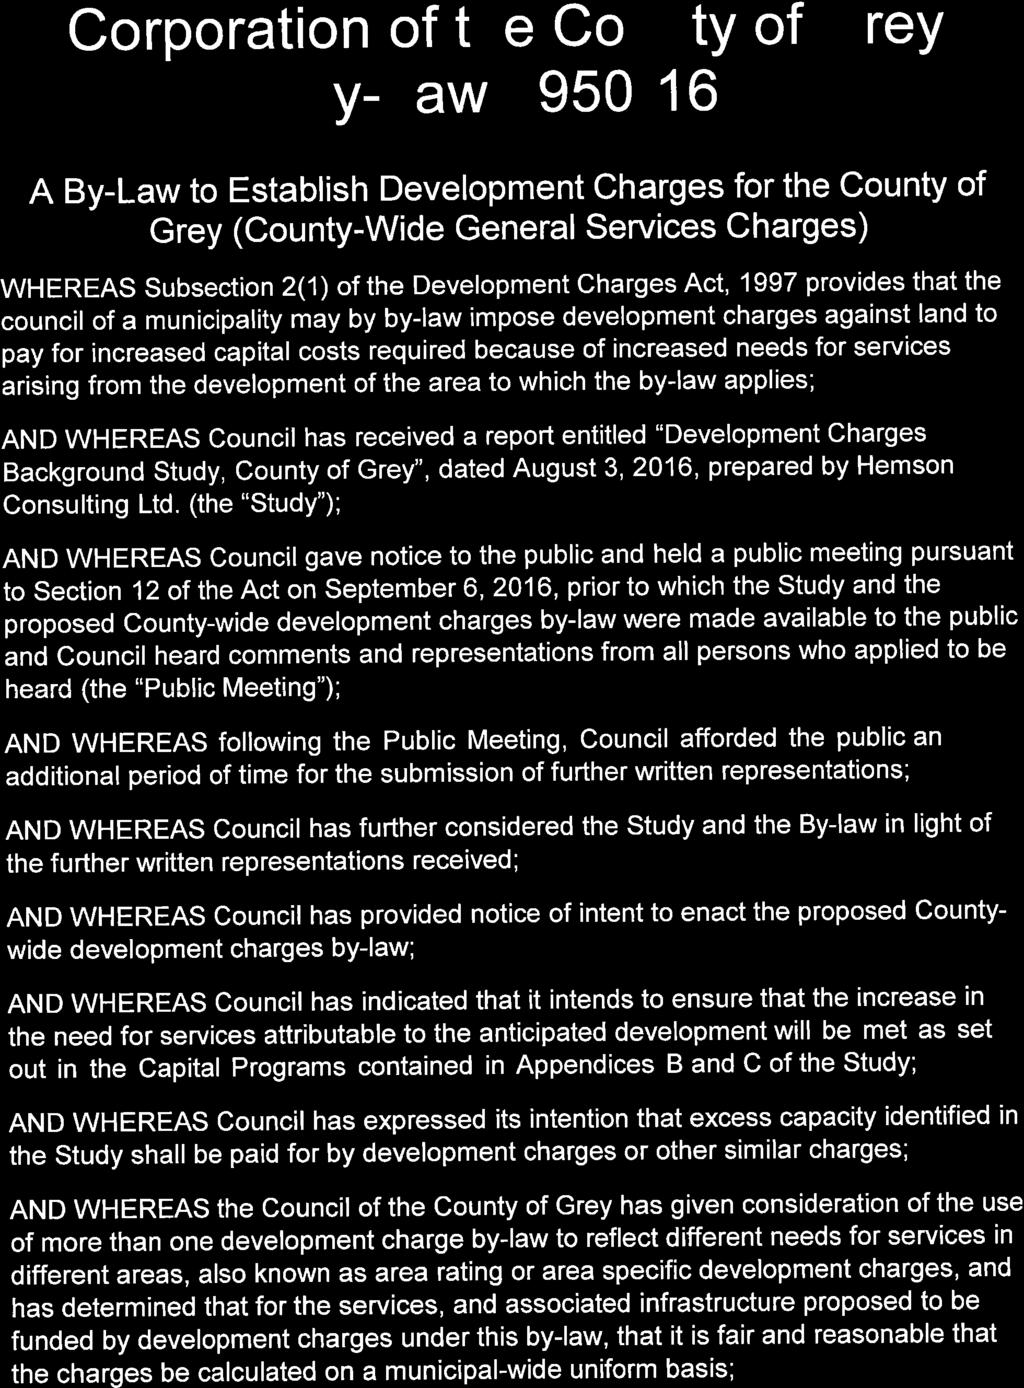 Corporation of the CountY of GreY By-Law 4950-16 A By-Law to Establish Development Charges for the County of Grey (County-Wide General Seruices Charges) WHEREAS Subsection 2(1) of the Development